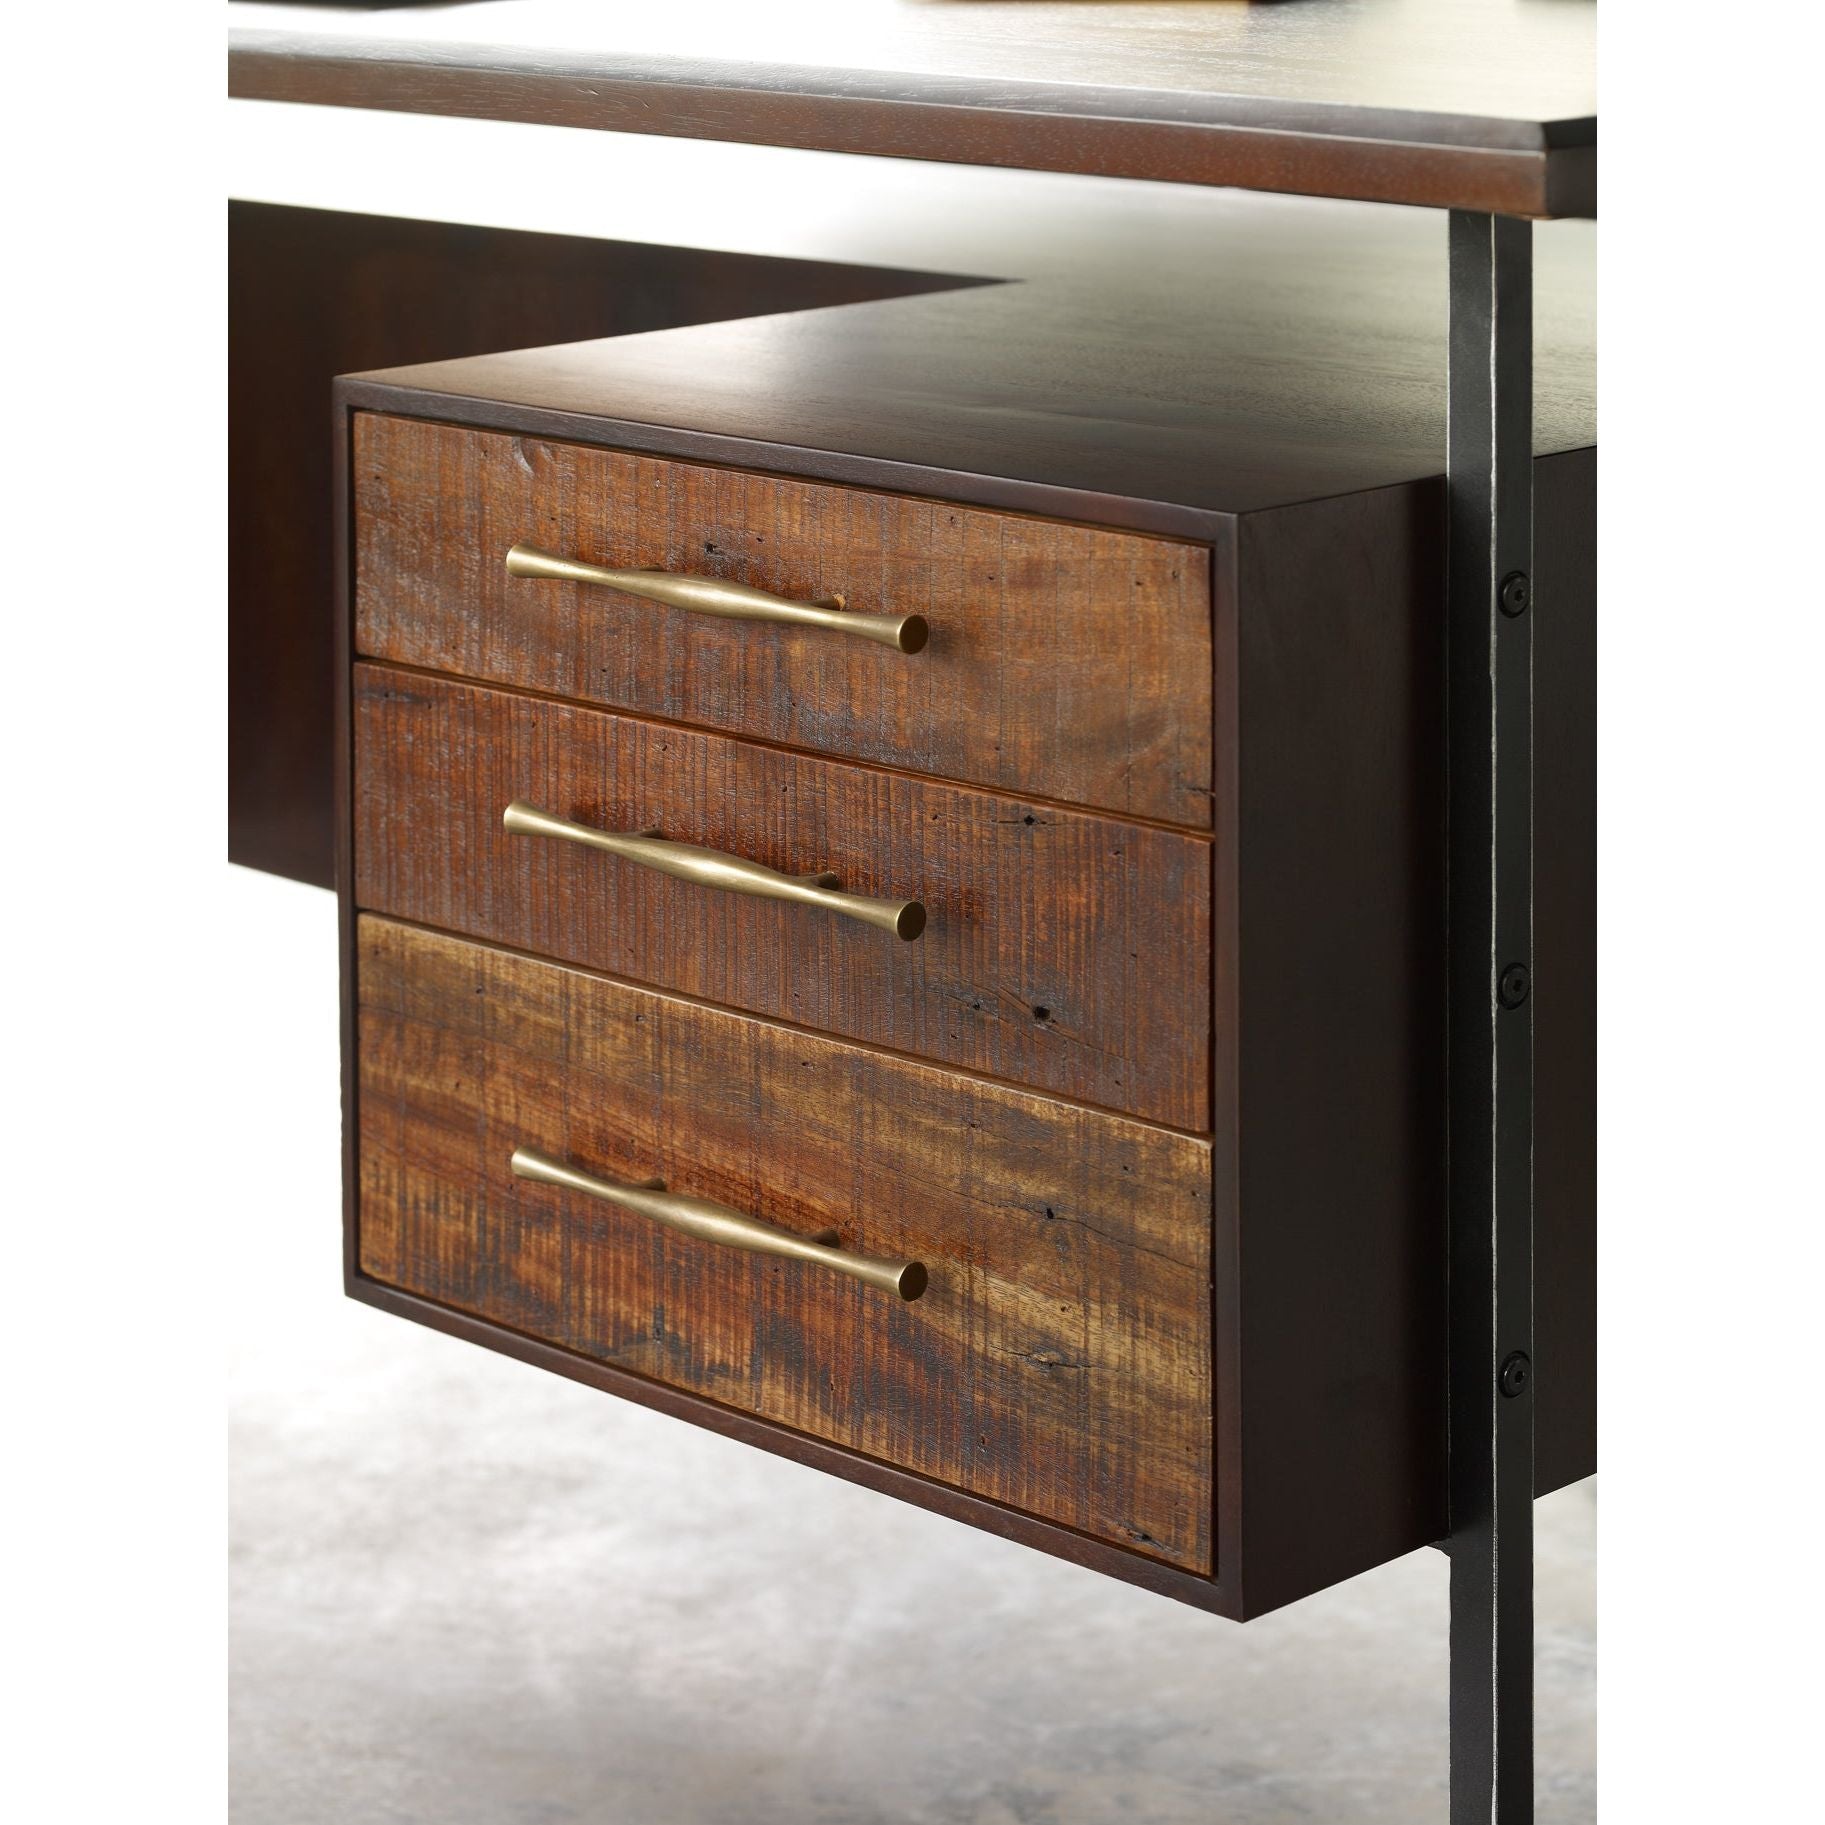 This mid-century inspired lawyer's desk offers heavy-duty storage with two-sided cabinetry. A floating top and simple iron legs keeps the look light and modern. Solid acacia casing with reclaimed peroba wood door and drawer fronts. This piece is designed in collaboration with Thomas Bina. Amethyst Home provides interior design, new construction, custom furniture, and area rugs in the Portland metro area.